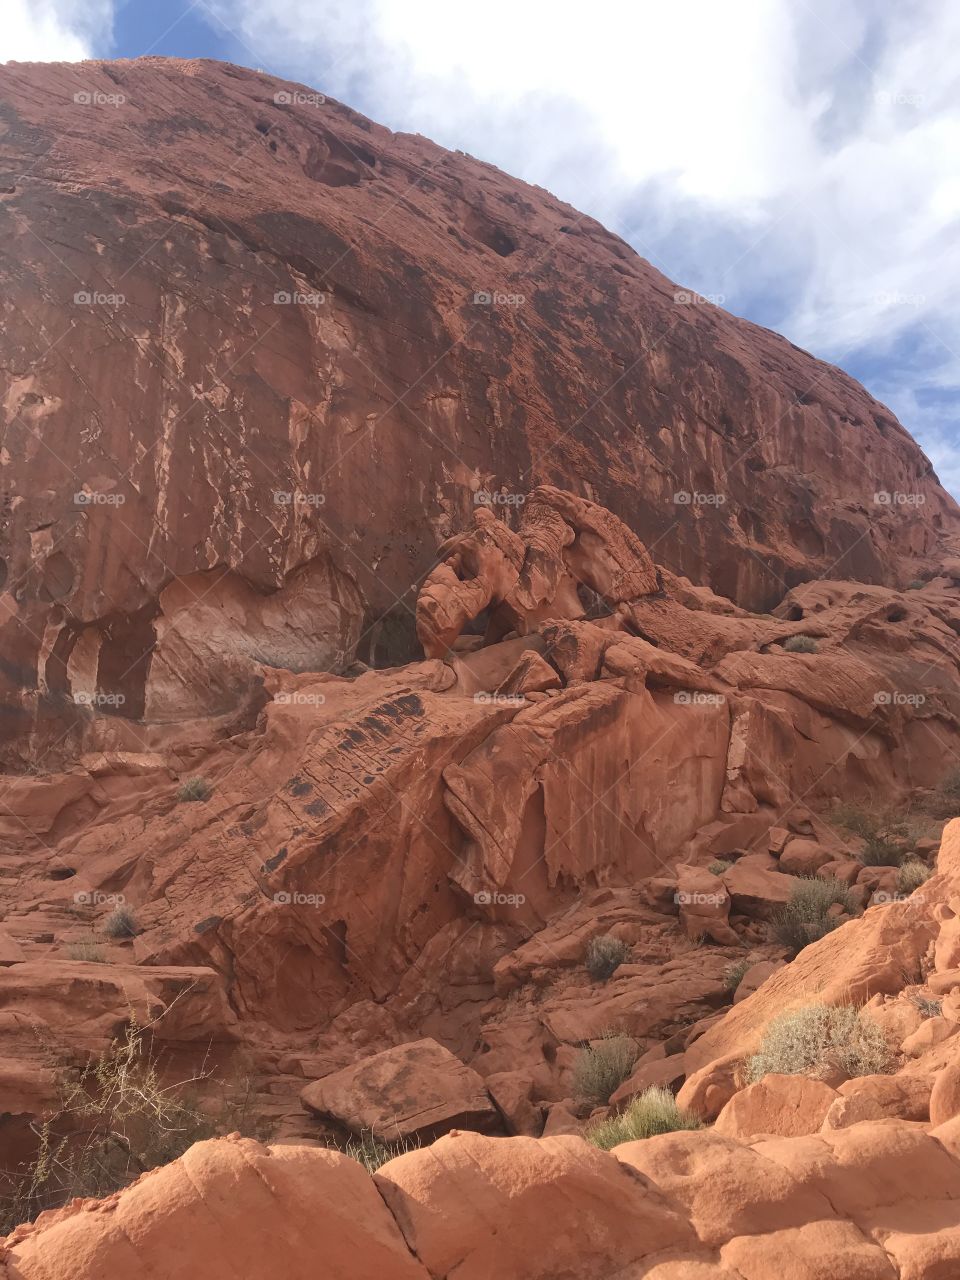 Elephant Rock at Valley of Fire State Park in Overton, Nevada 